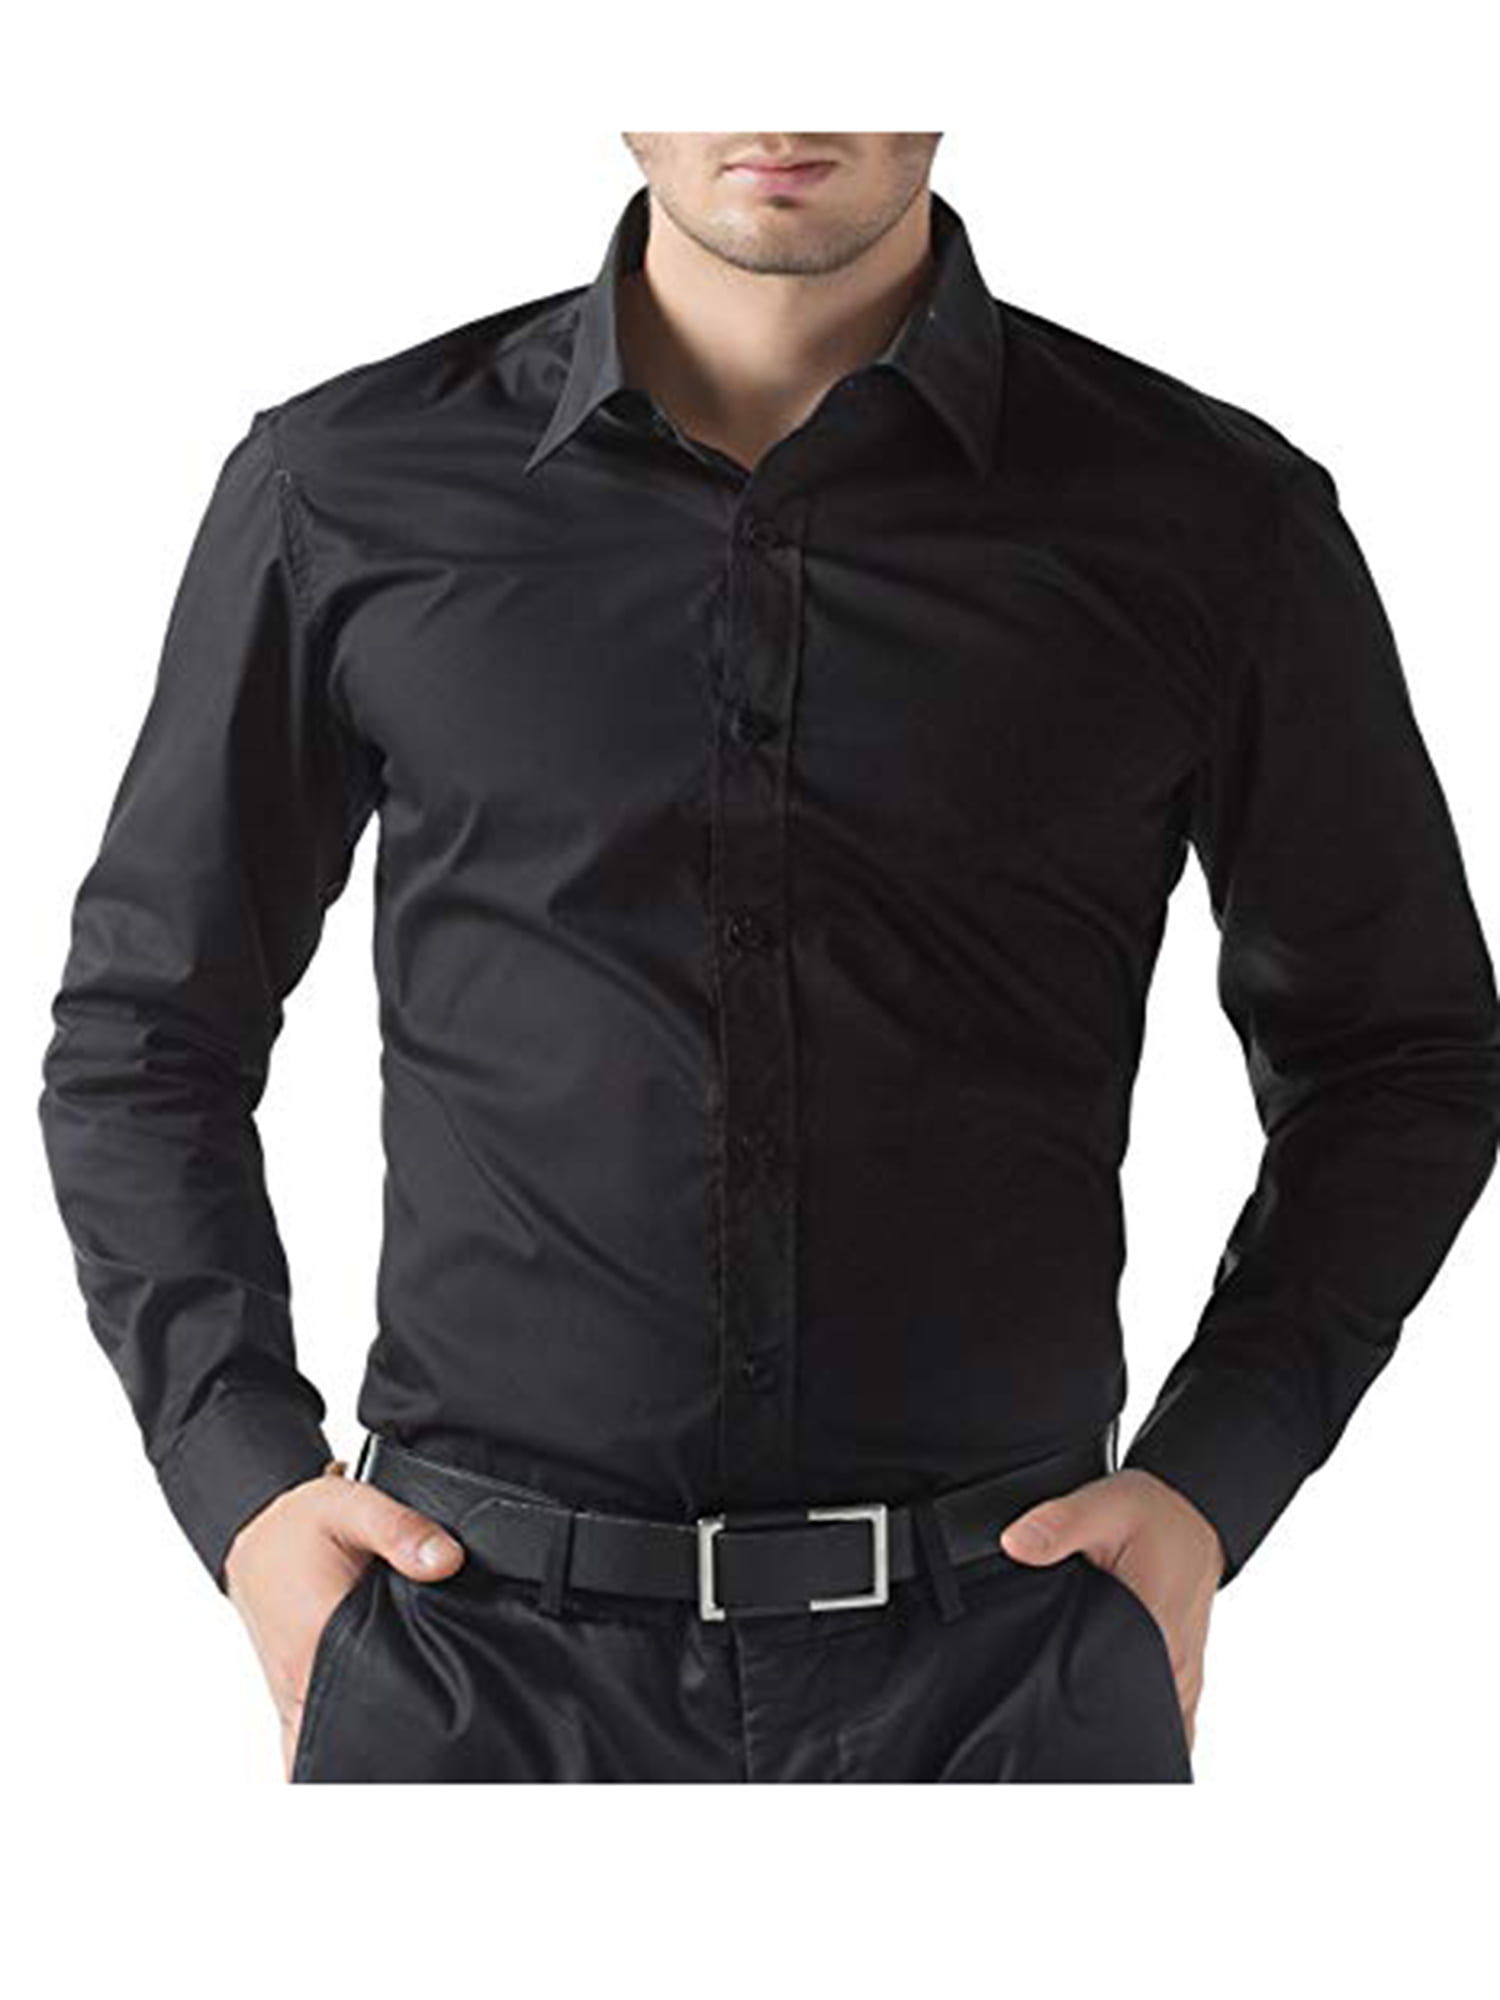 Sebaby Men Slim Fleece Business Thicken Button-Up Blouses and Tops Shirts